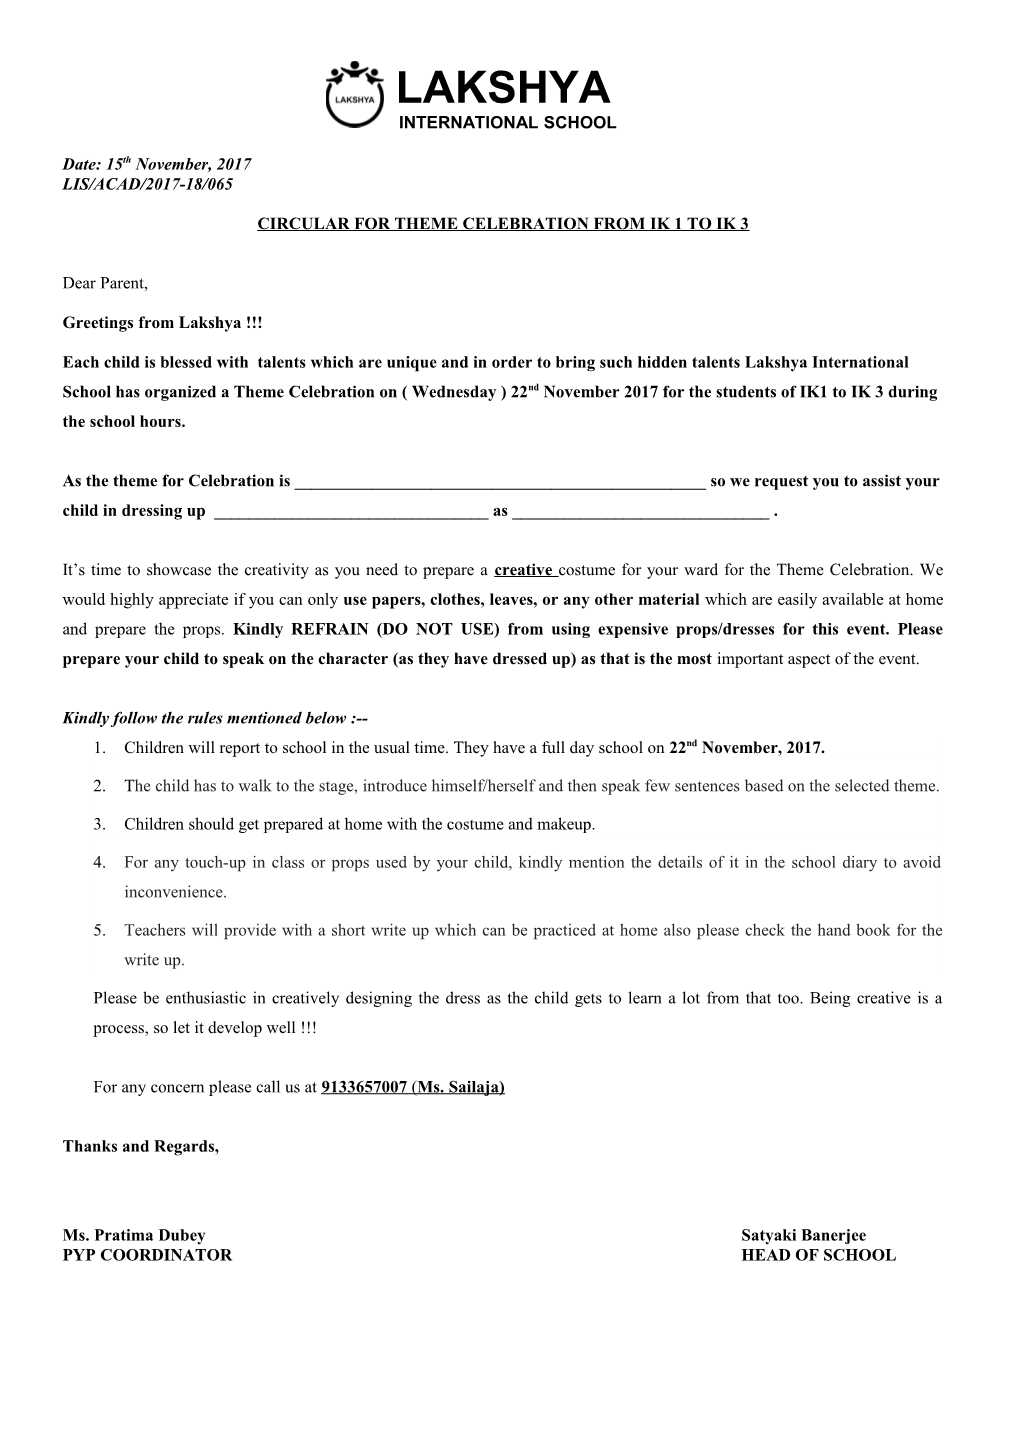 Circular for Theme Celebration from Ik 1 to Ik 3